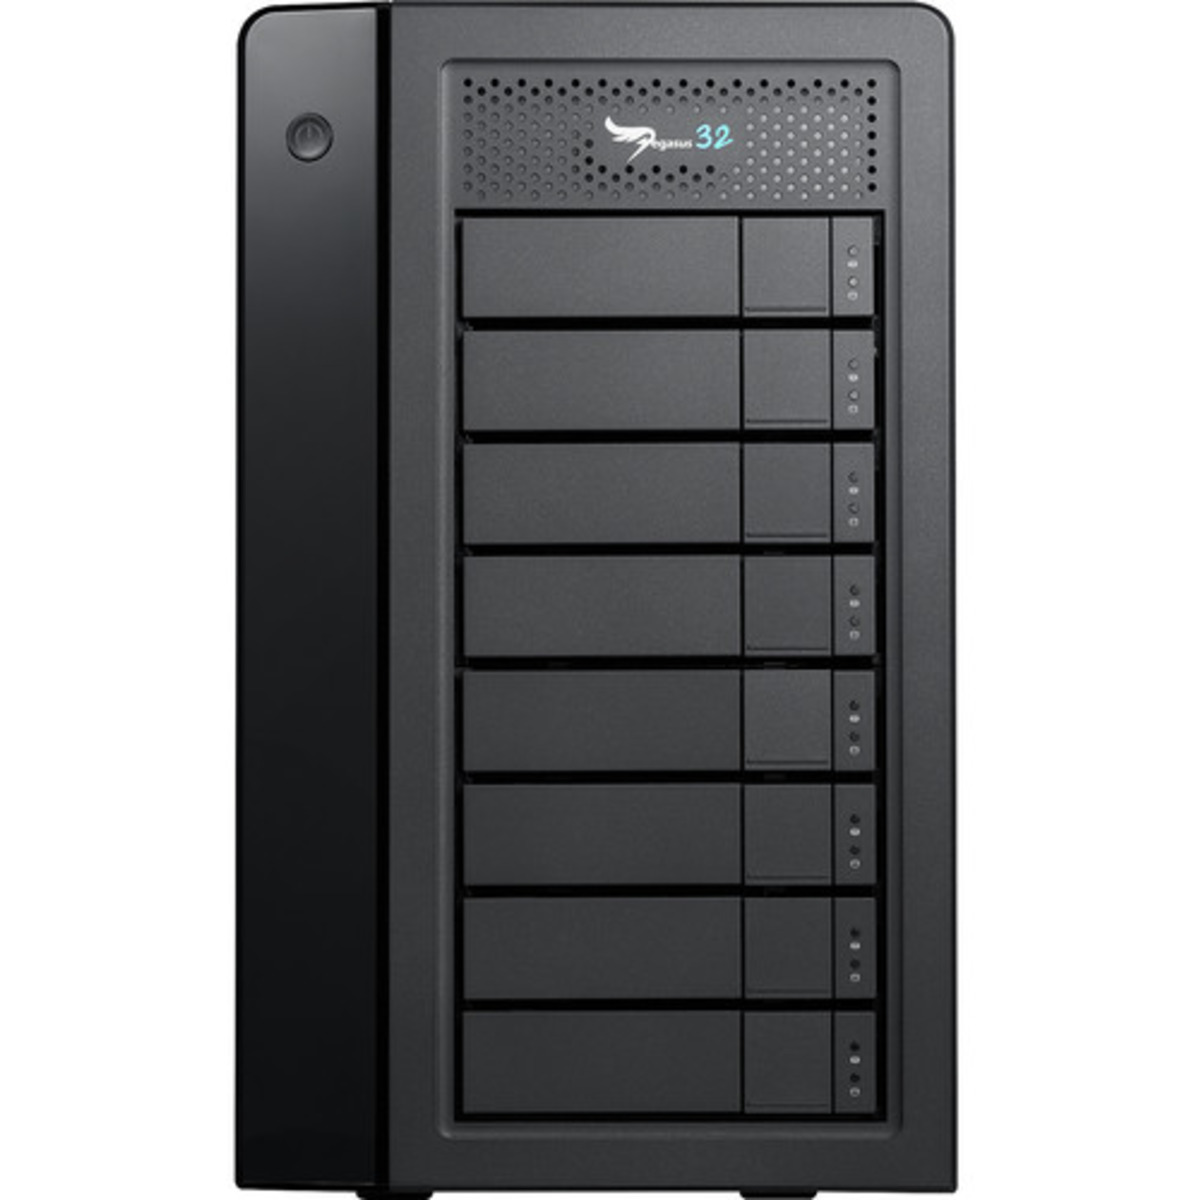 Promise Technology Pegasus32 R8 Thunderbolt 3 10tb 8-Bay Desktop Multimedia / Power User / Business DAS - Direct Attached Storage Device 5x2tb Western Digital Red Plus WD20EFZX 3.5 5400rpm SATA 6Gb/s HDD NAS Class Drives Installed - Burn-In Tested - ON SALE Pegasus32 R8 Thunderbolt 3